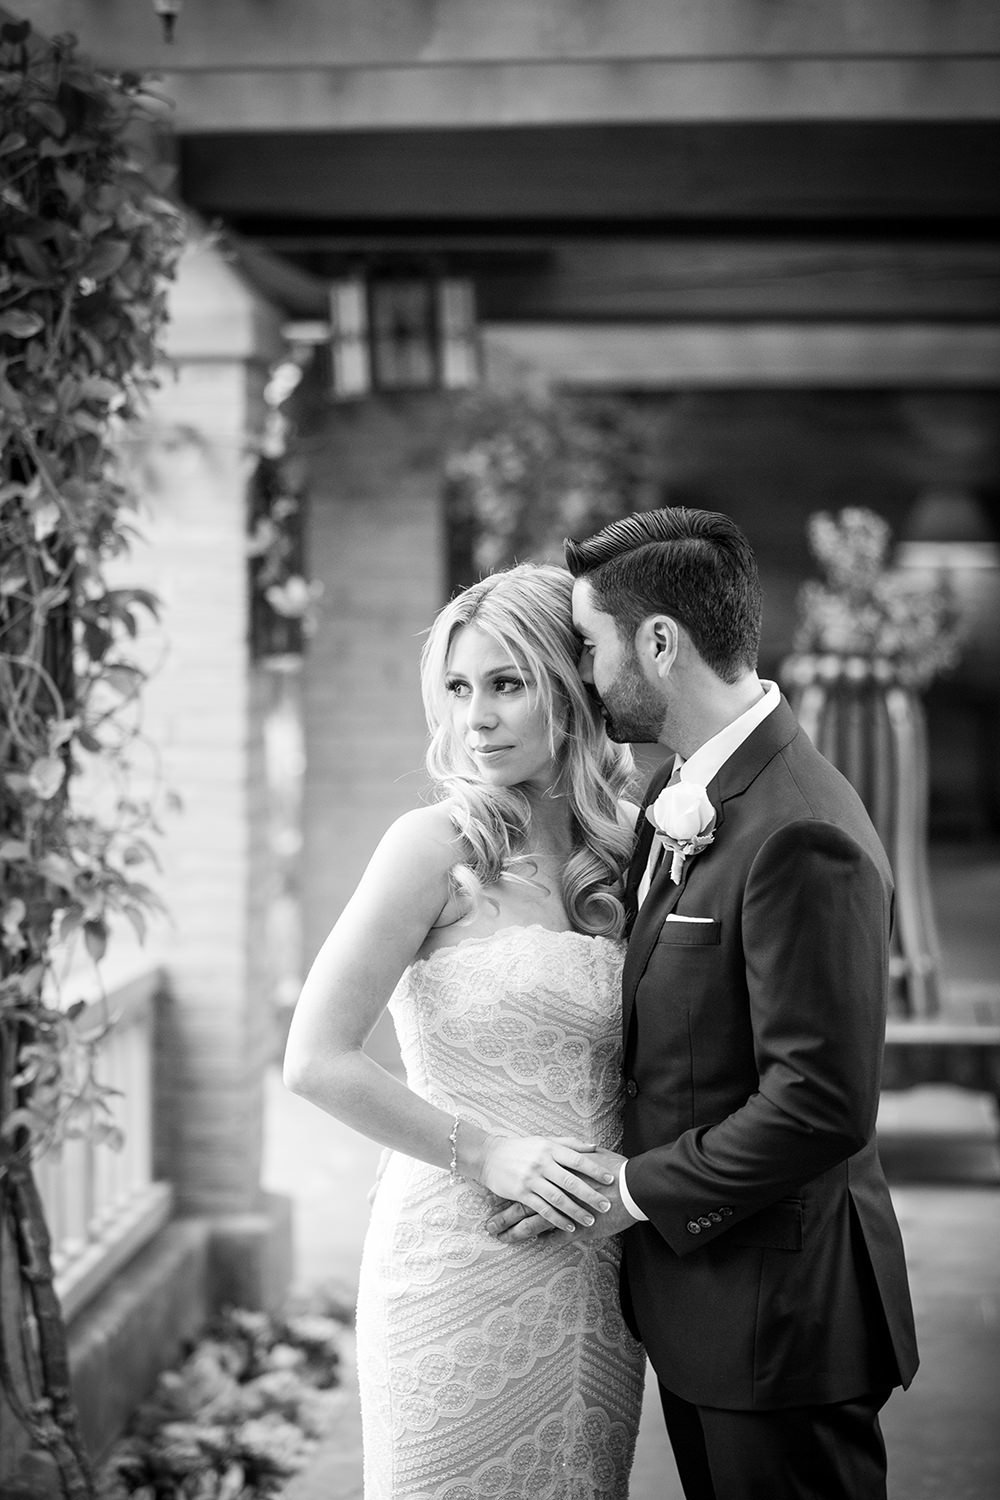 romantic black and white with the bride and groom